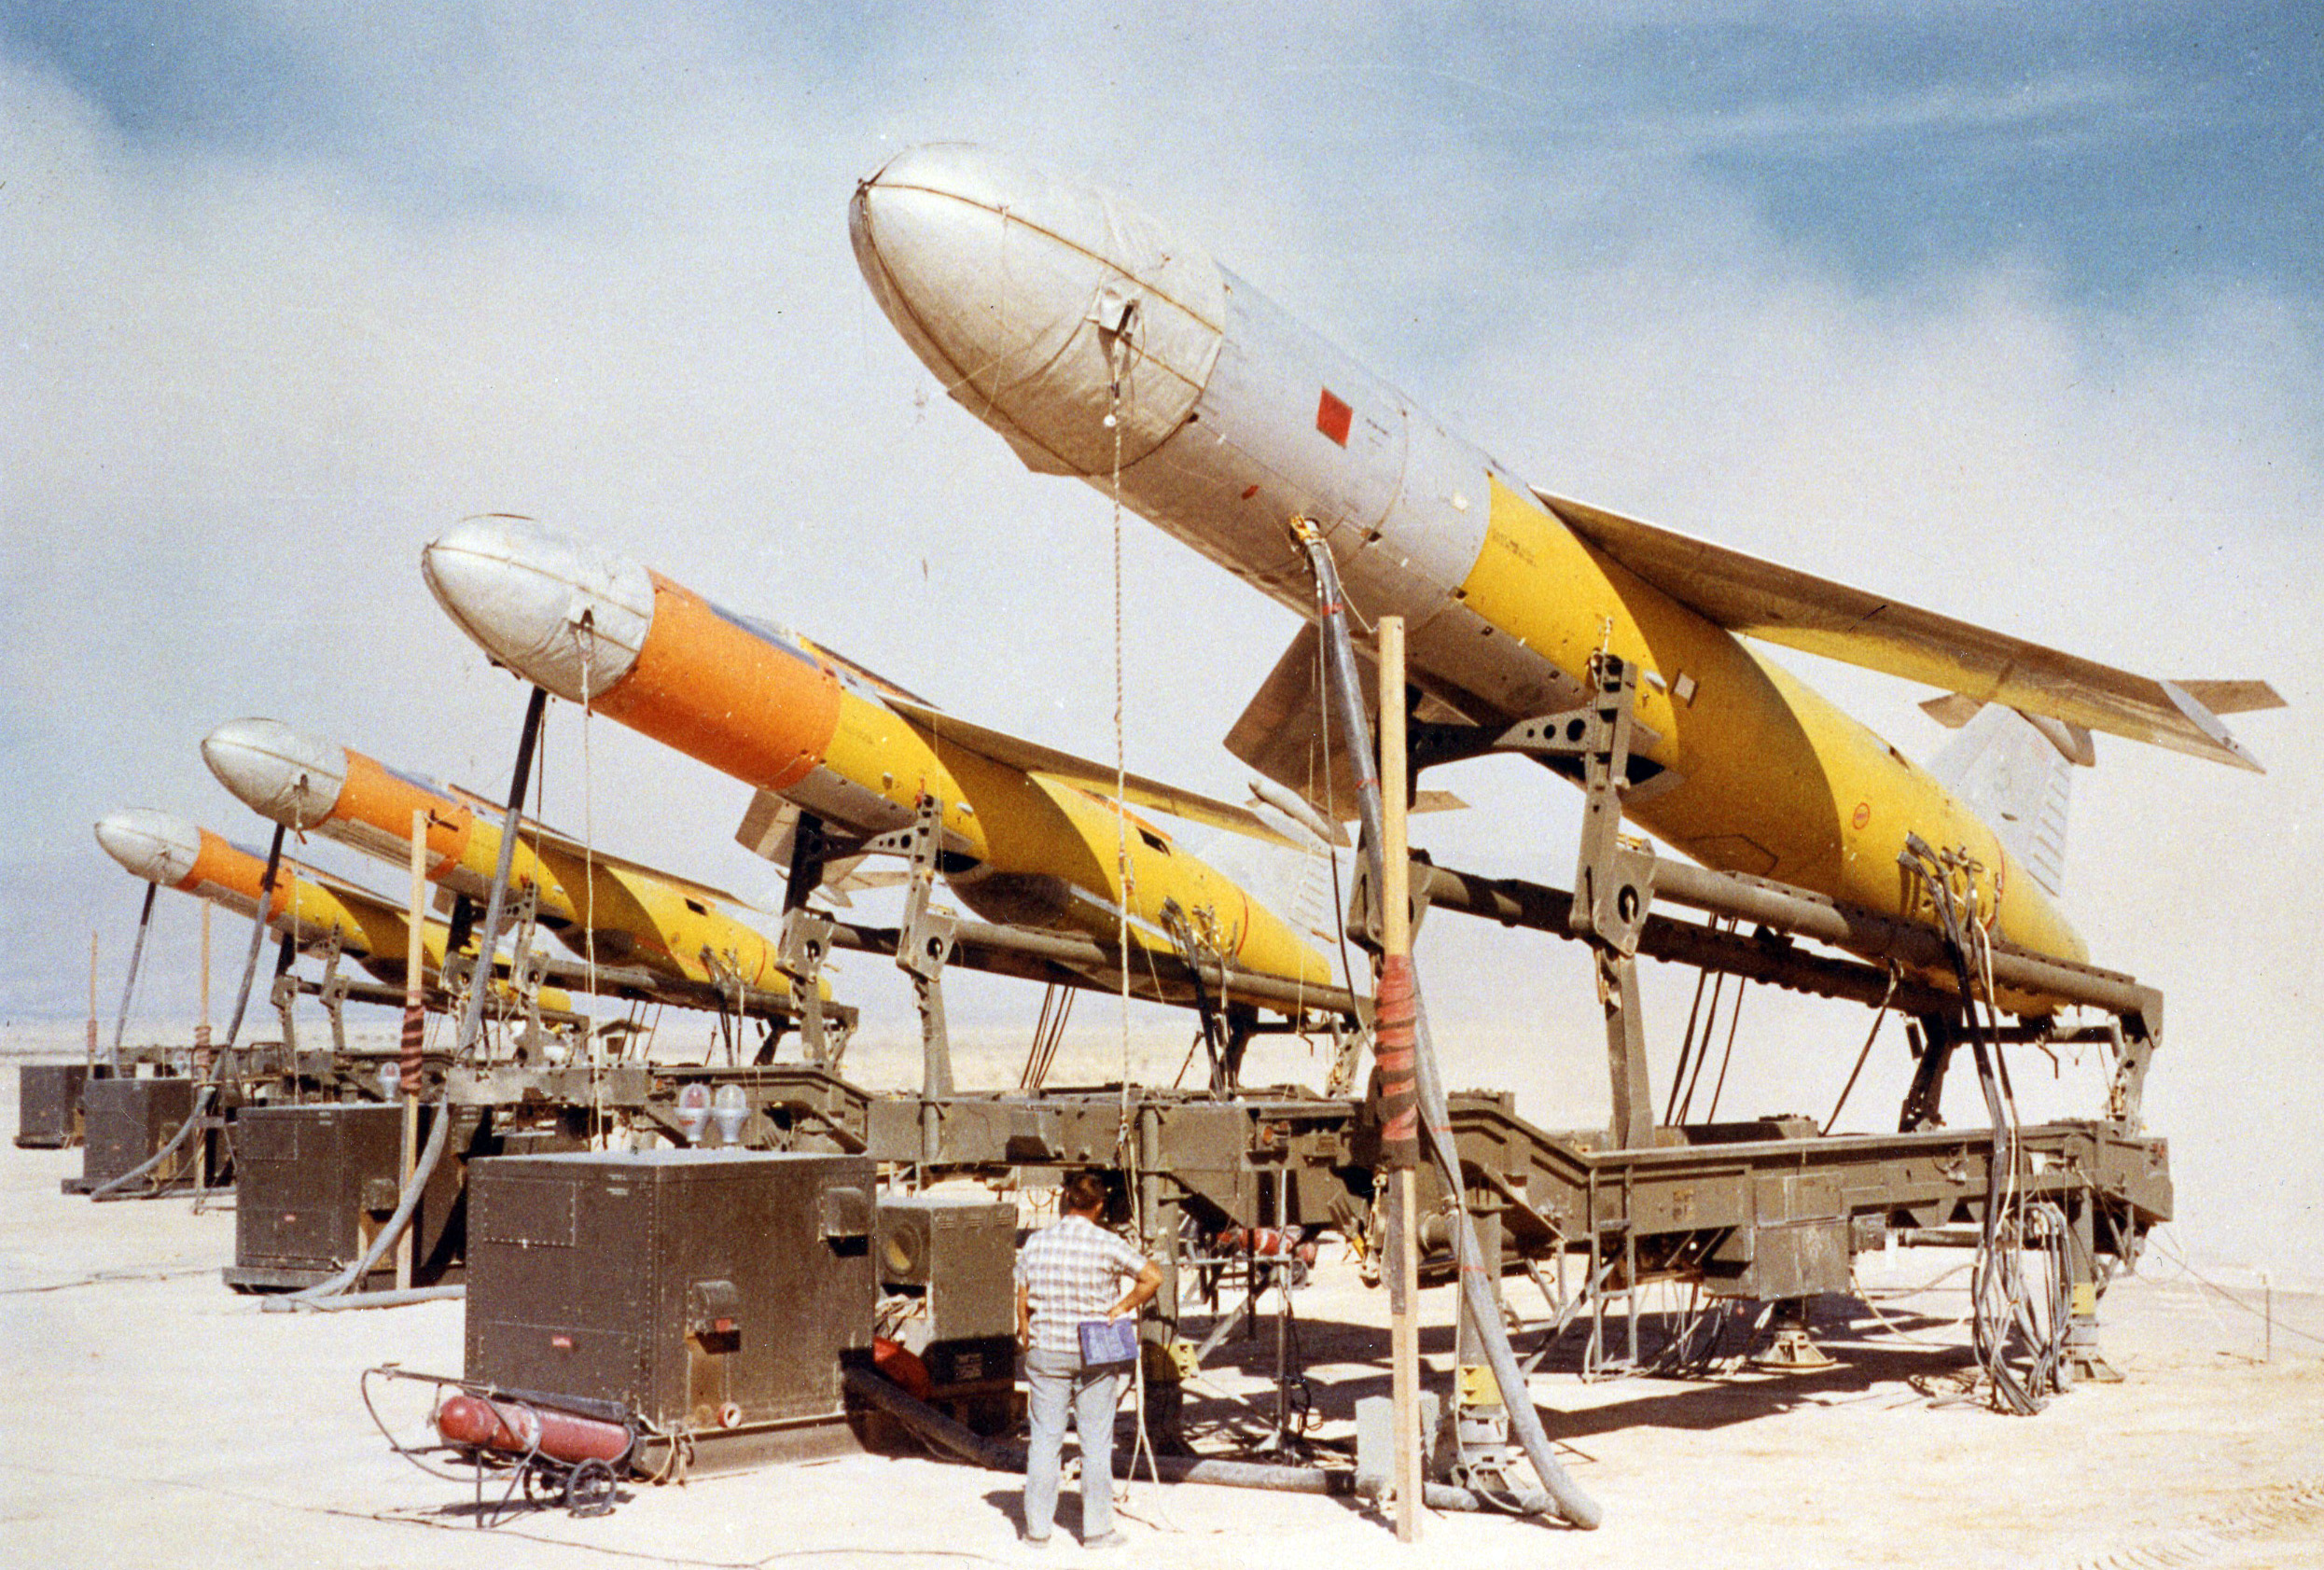 Before ICBM’s took over the long range nuclear deliv-ery mission, winged missiles such as the Northrop SM-62,  Martin TM-76 Mace (here) and Boeing IM-99 Bomarc  were designed to fulfill that mission.